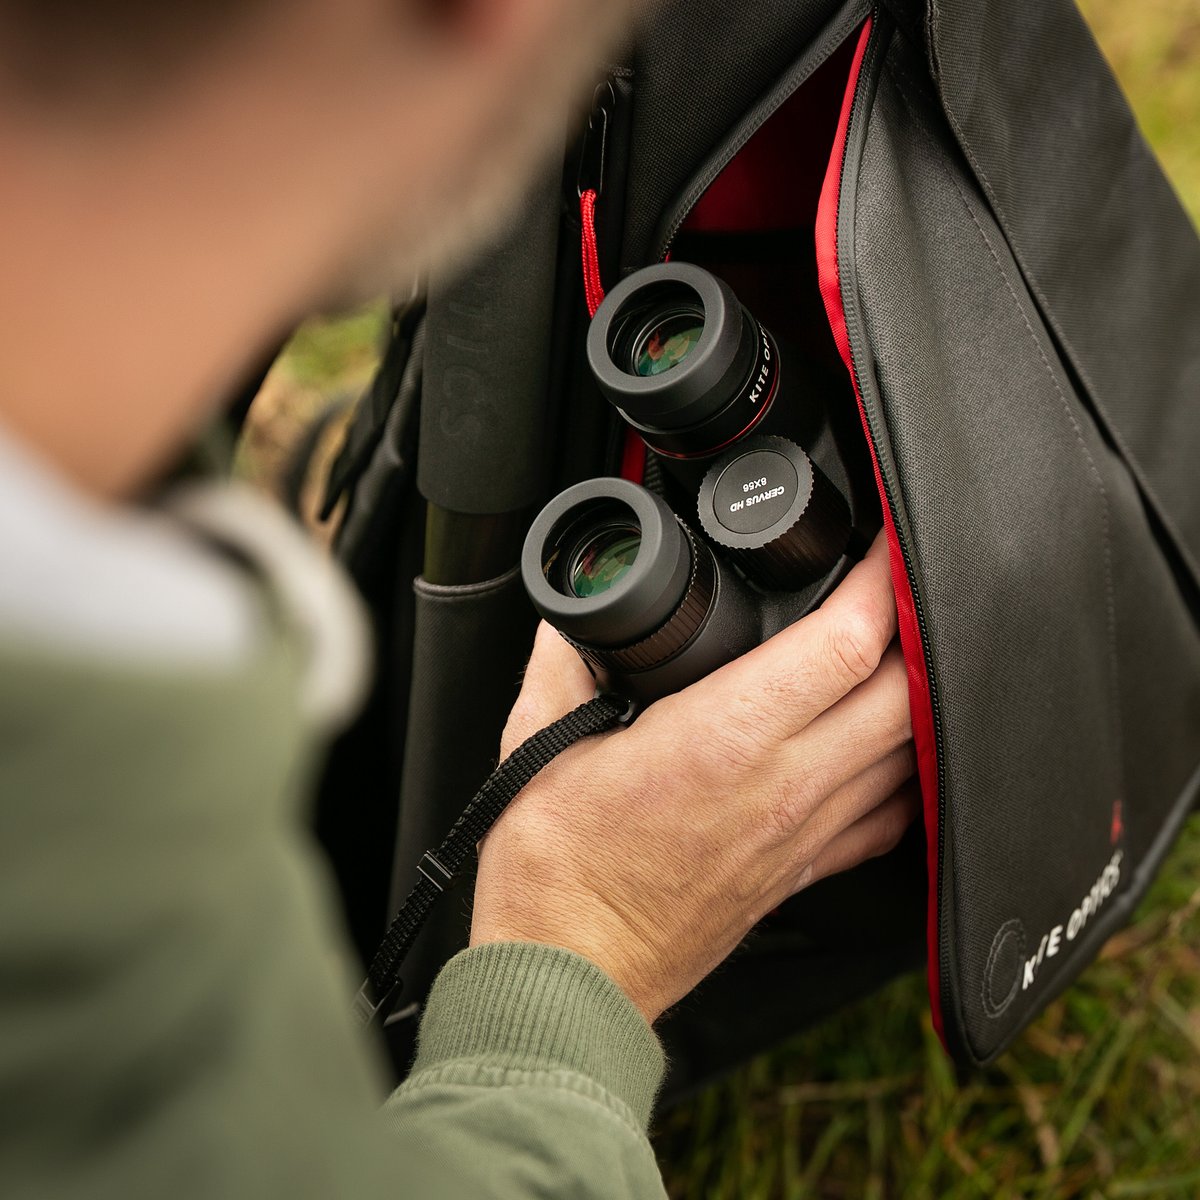 KITE VIATO The Viato backpack uses the inner space of the tripod through an intelligent and unique patented design, offering 15L of storage space, sufficient to hold all your essential gear for a day of nature photography, birdwatching or just hiking.